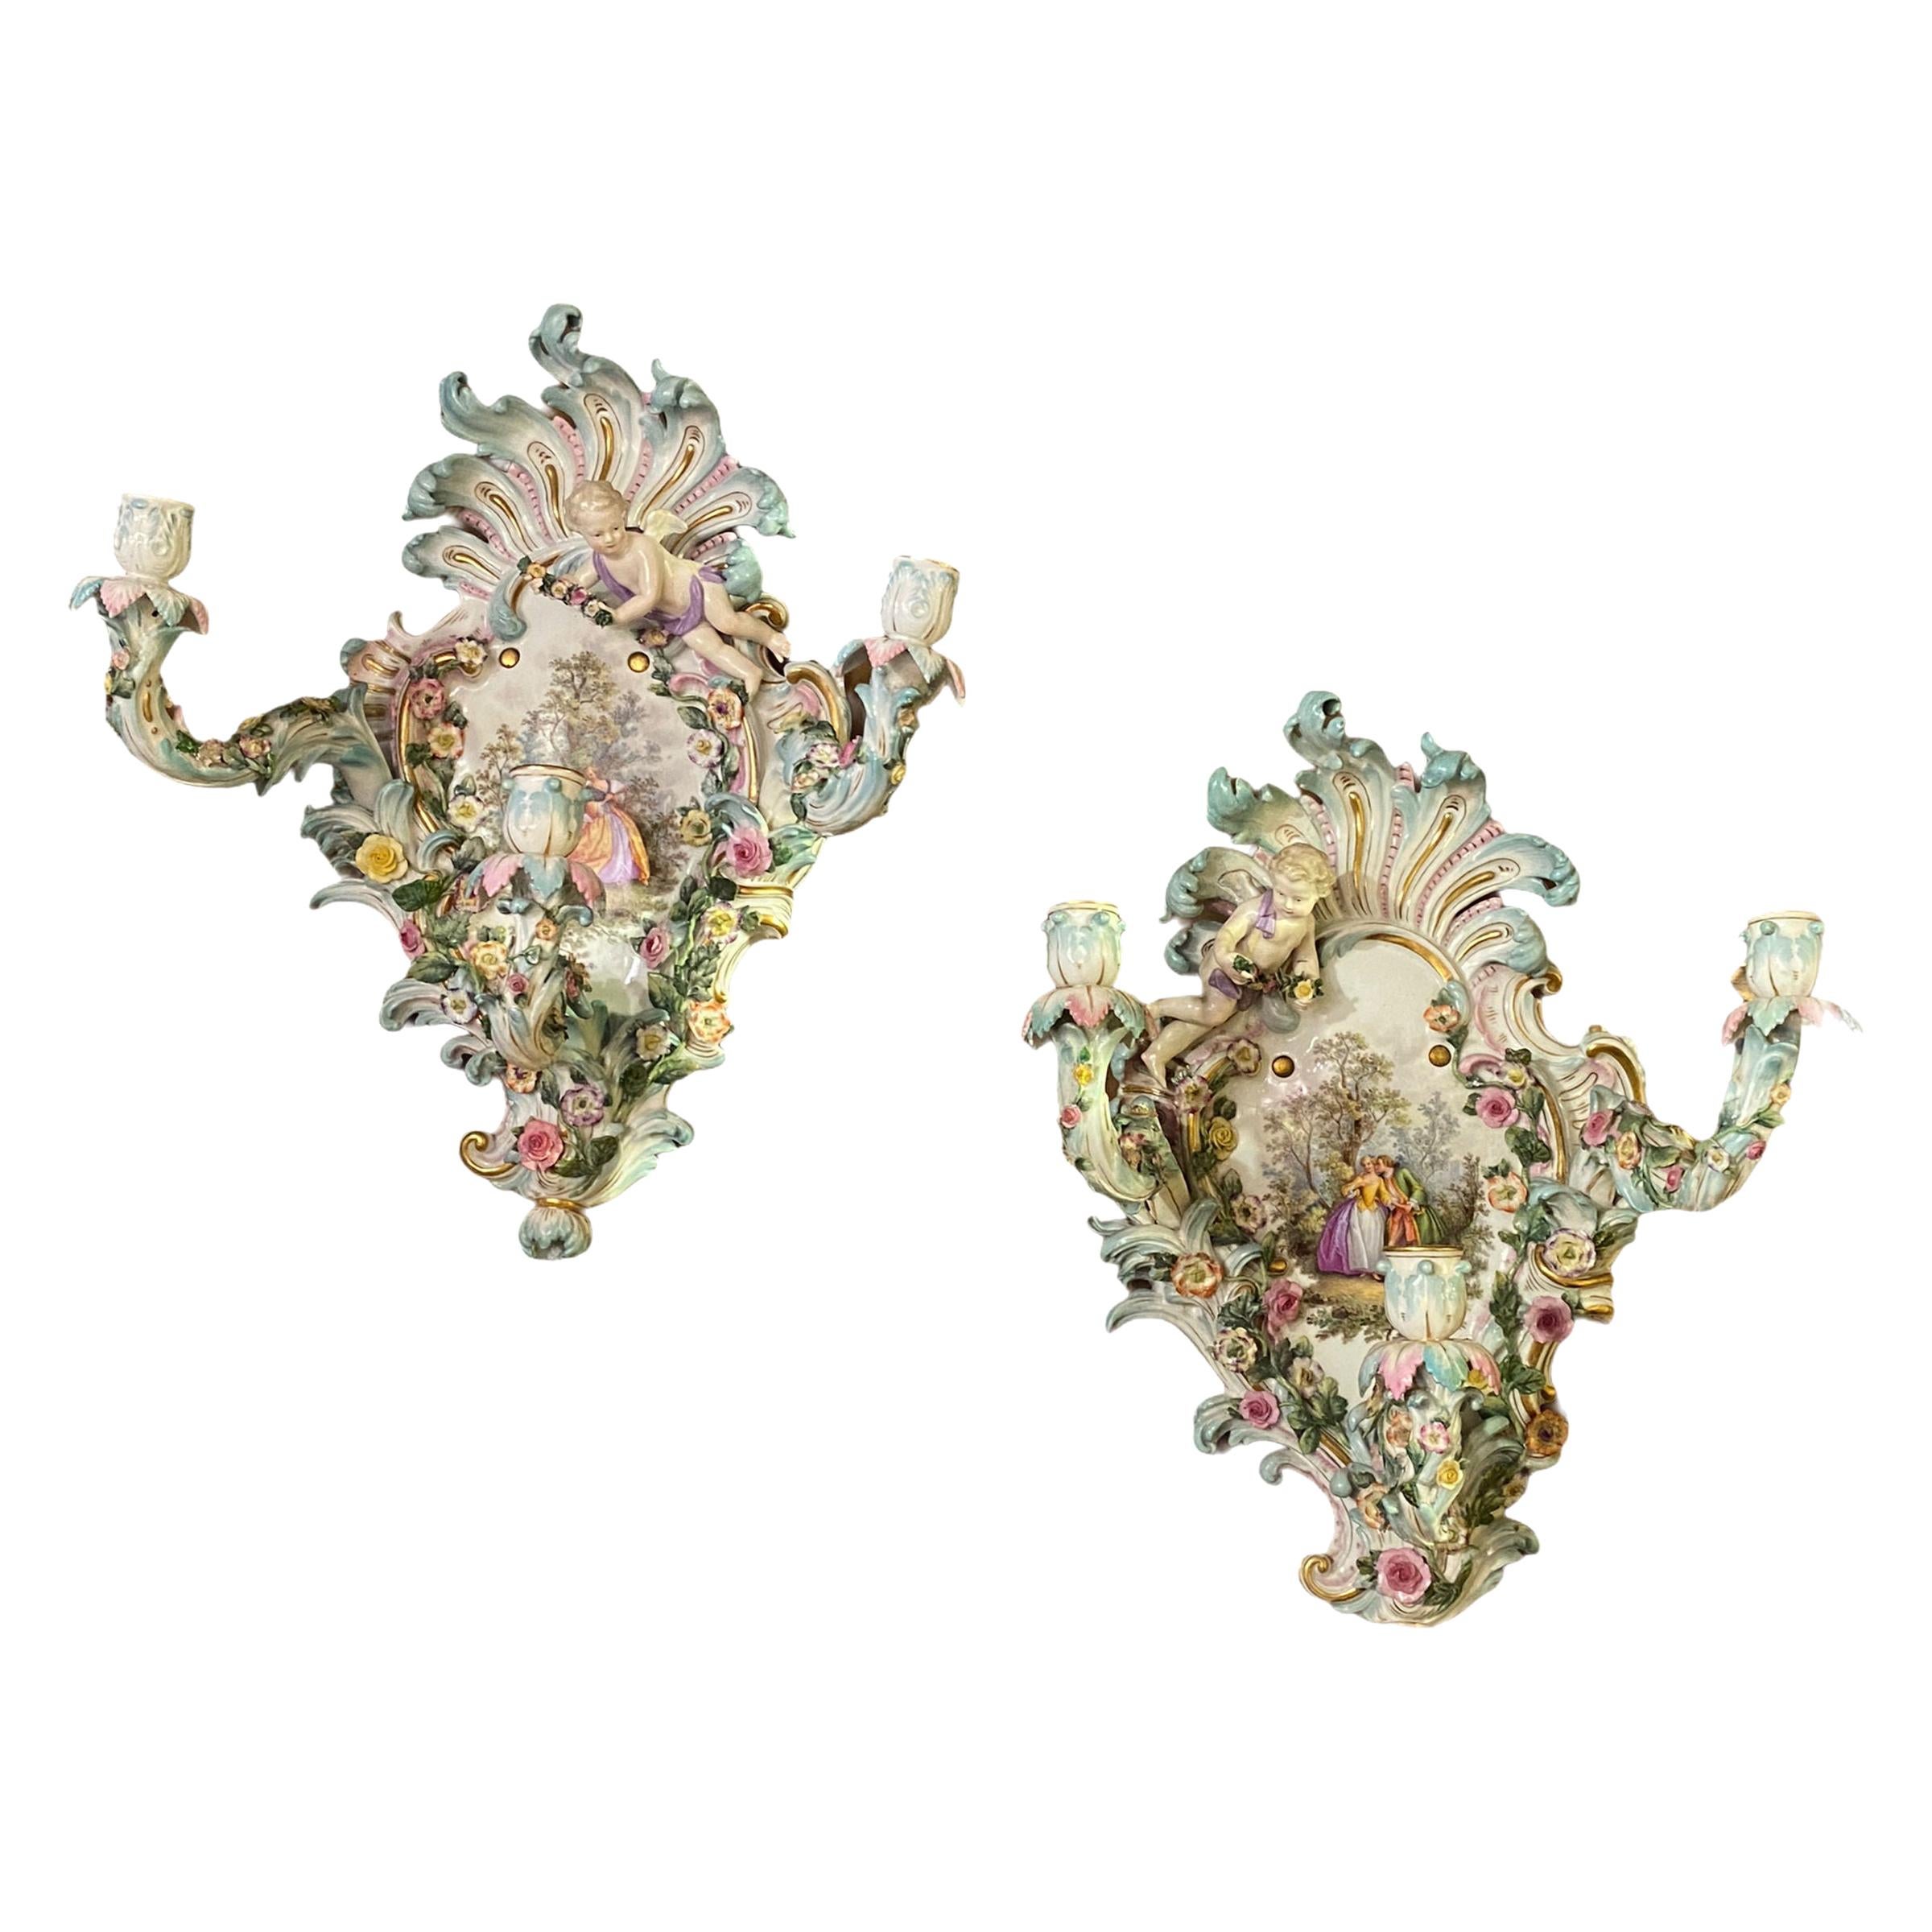 Pair of Meissen Rococo Style Flower Encrusted Wall Appliques / Sconces